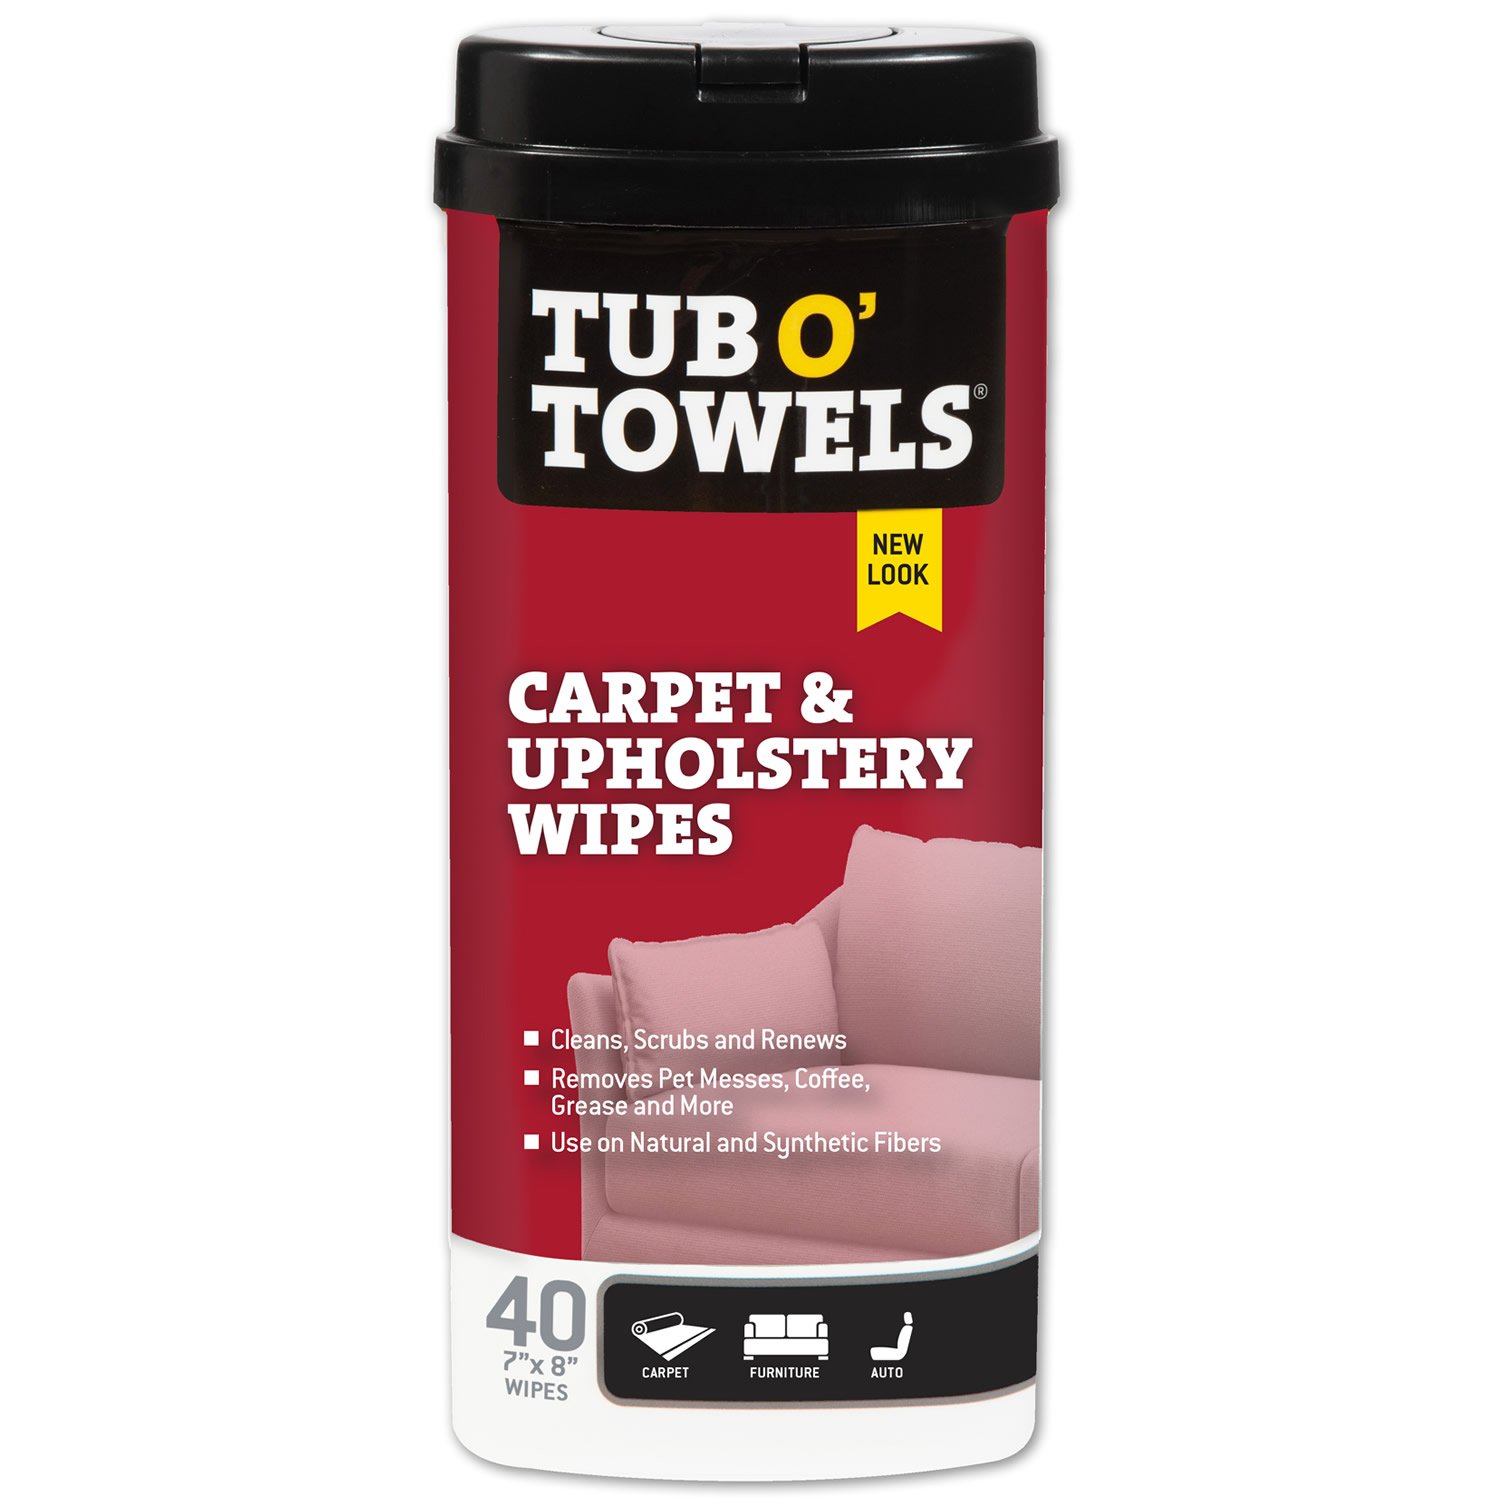 TUB O' TOWELS TW40-CP Heavy-Duty Cleaning Wipes, 8 in W, 7 in L, Light Citrus, 40 Wipes, Canister